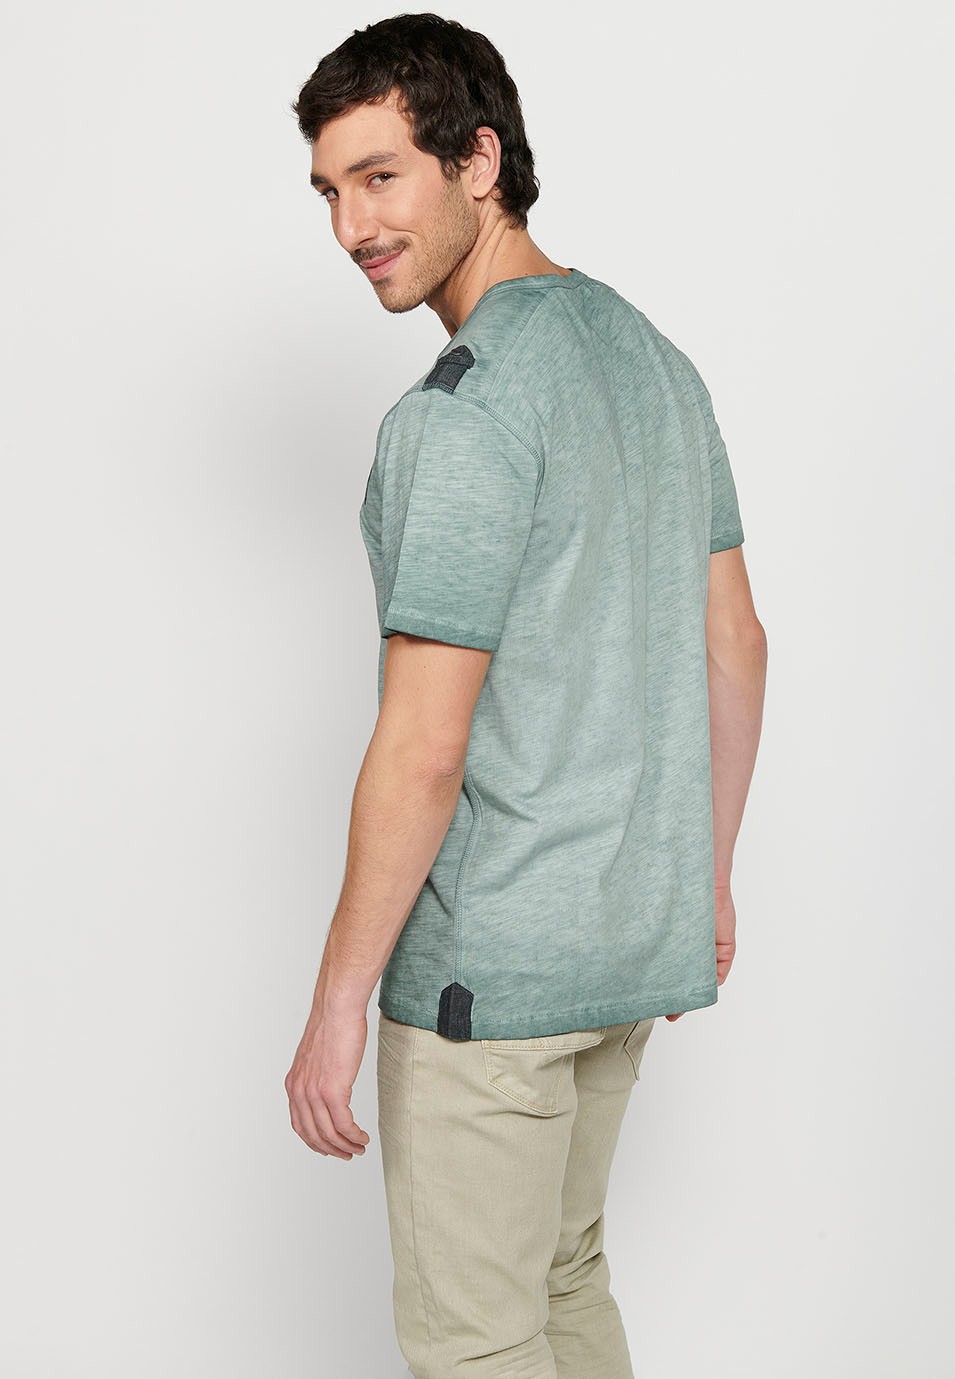 Men's Short Sleeve Cotton T-shirt with Round Neck with Buttoned Opening and Khaki Front Detail 2